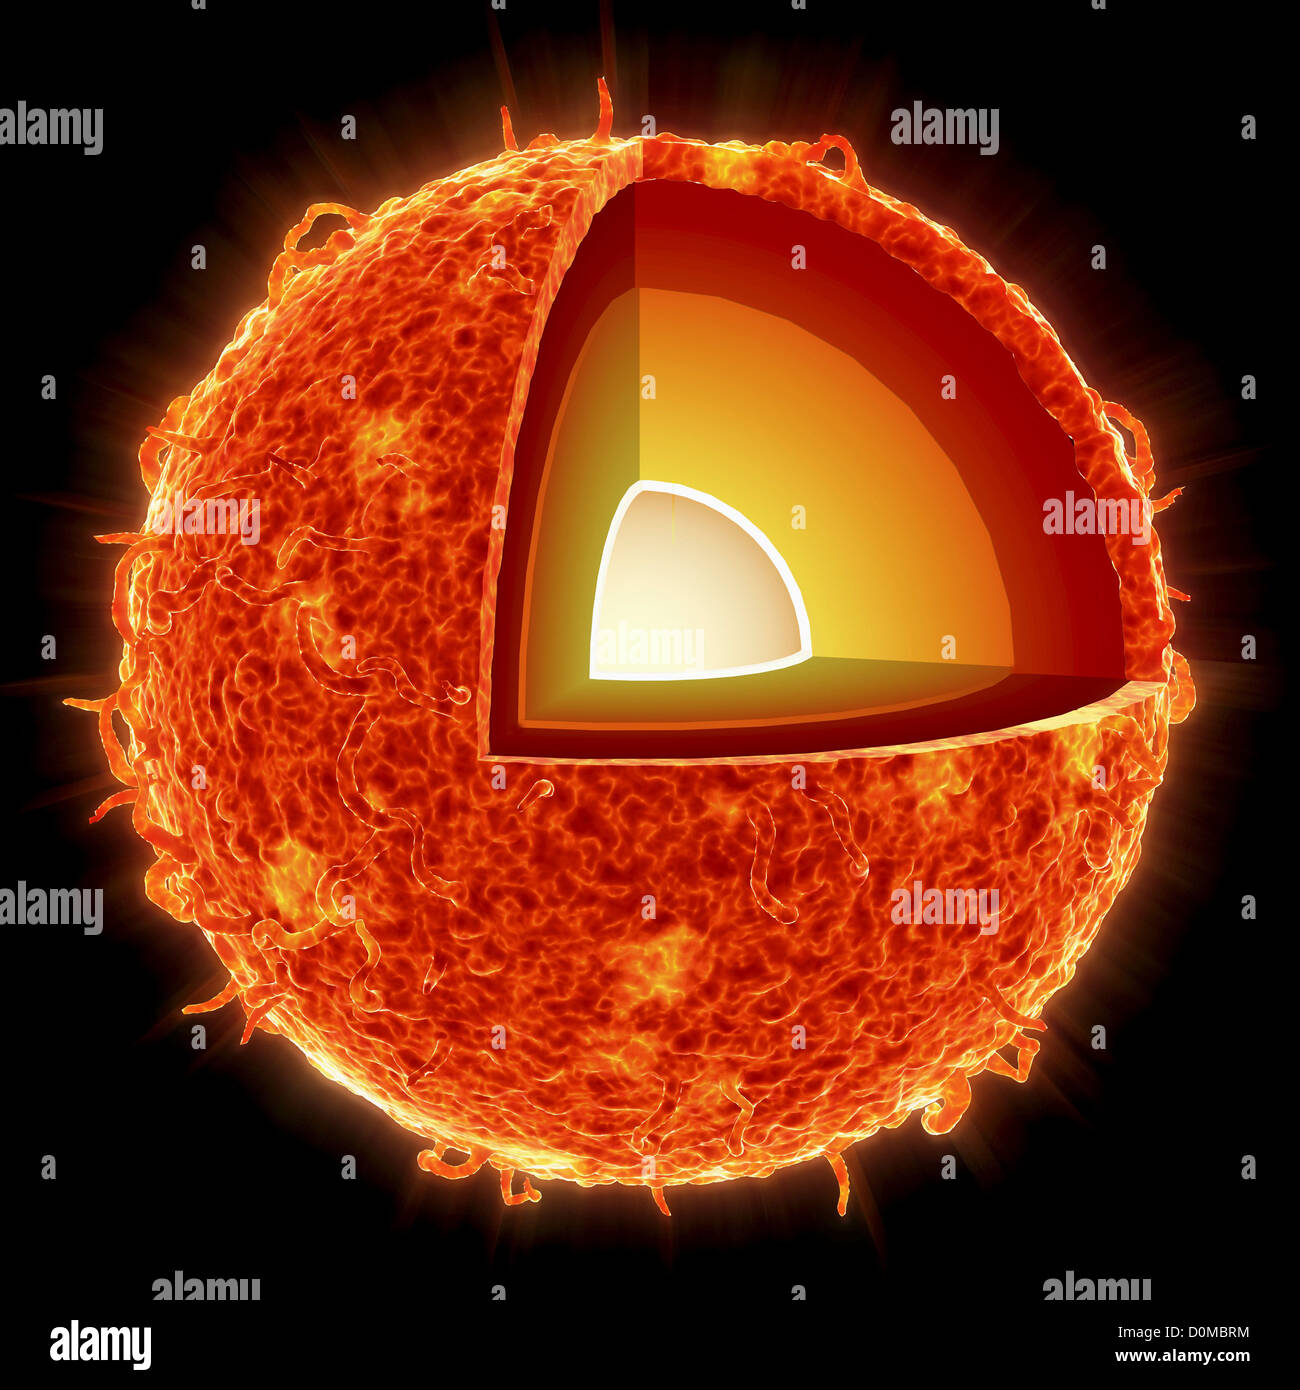 Cross section of the sun showing the core, radiative zone and convective zone. Stock Photo